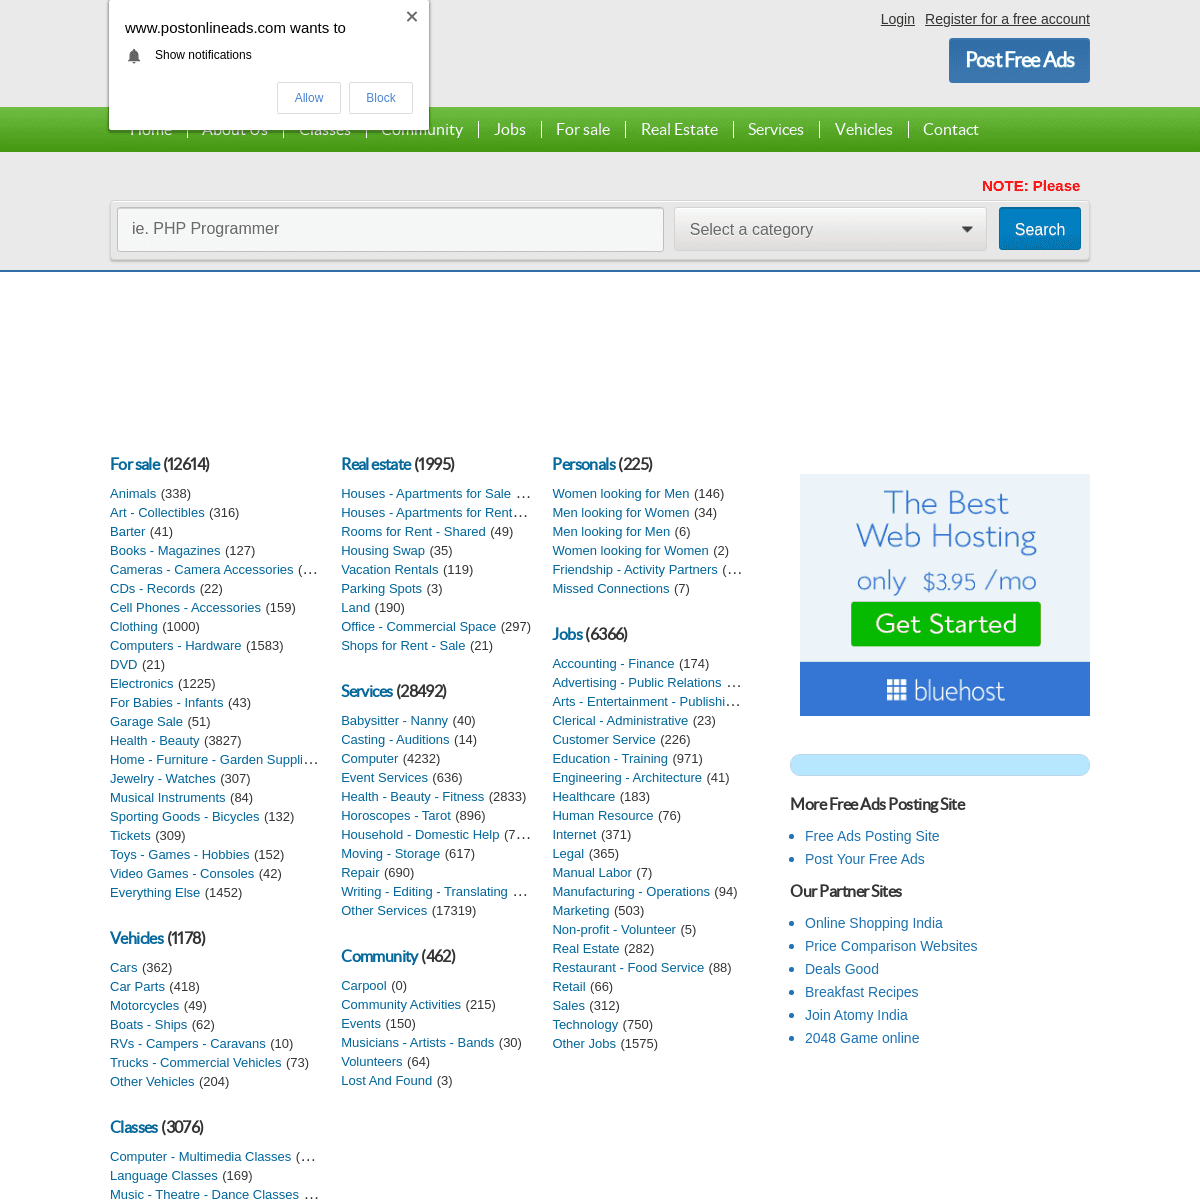 A complete backup of https://postonlineads.com